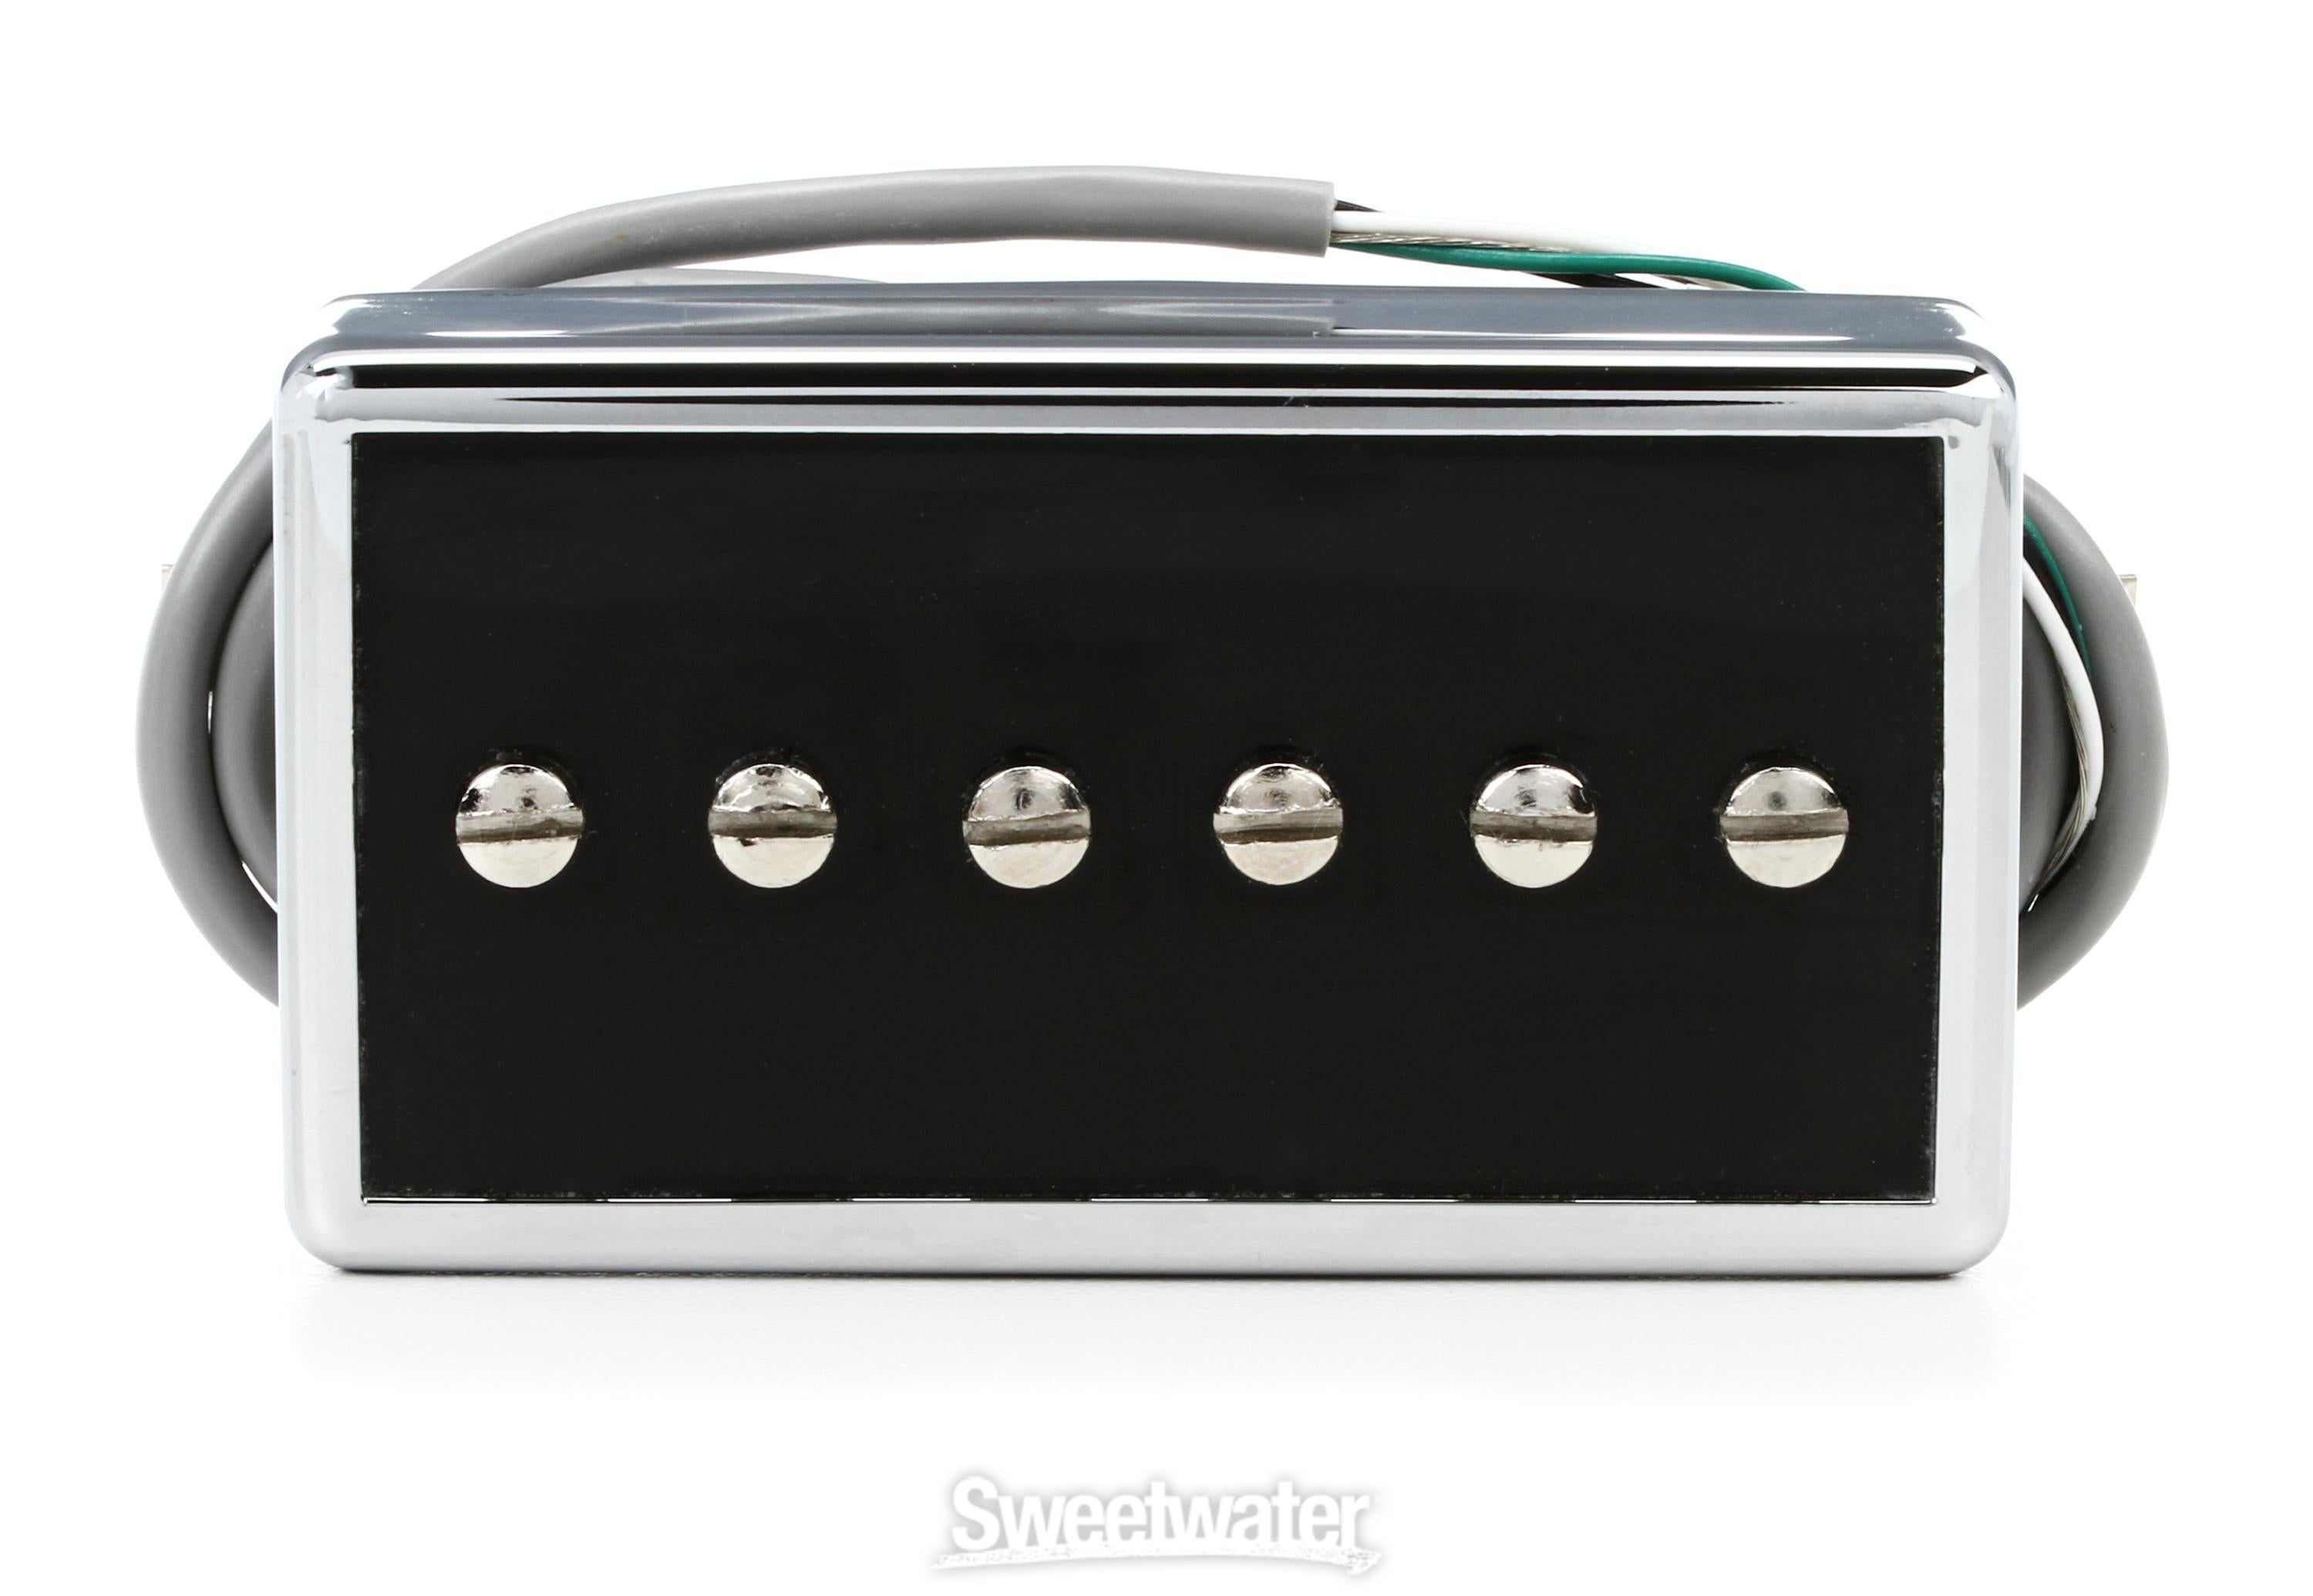 Gibson Accessories P-94T Humbucker-Sized P-90 Bridge 2-conductor Pickup -  Black and Silver